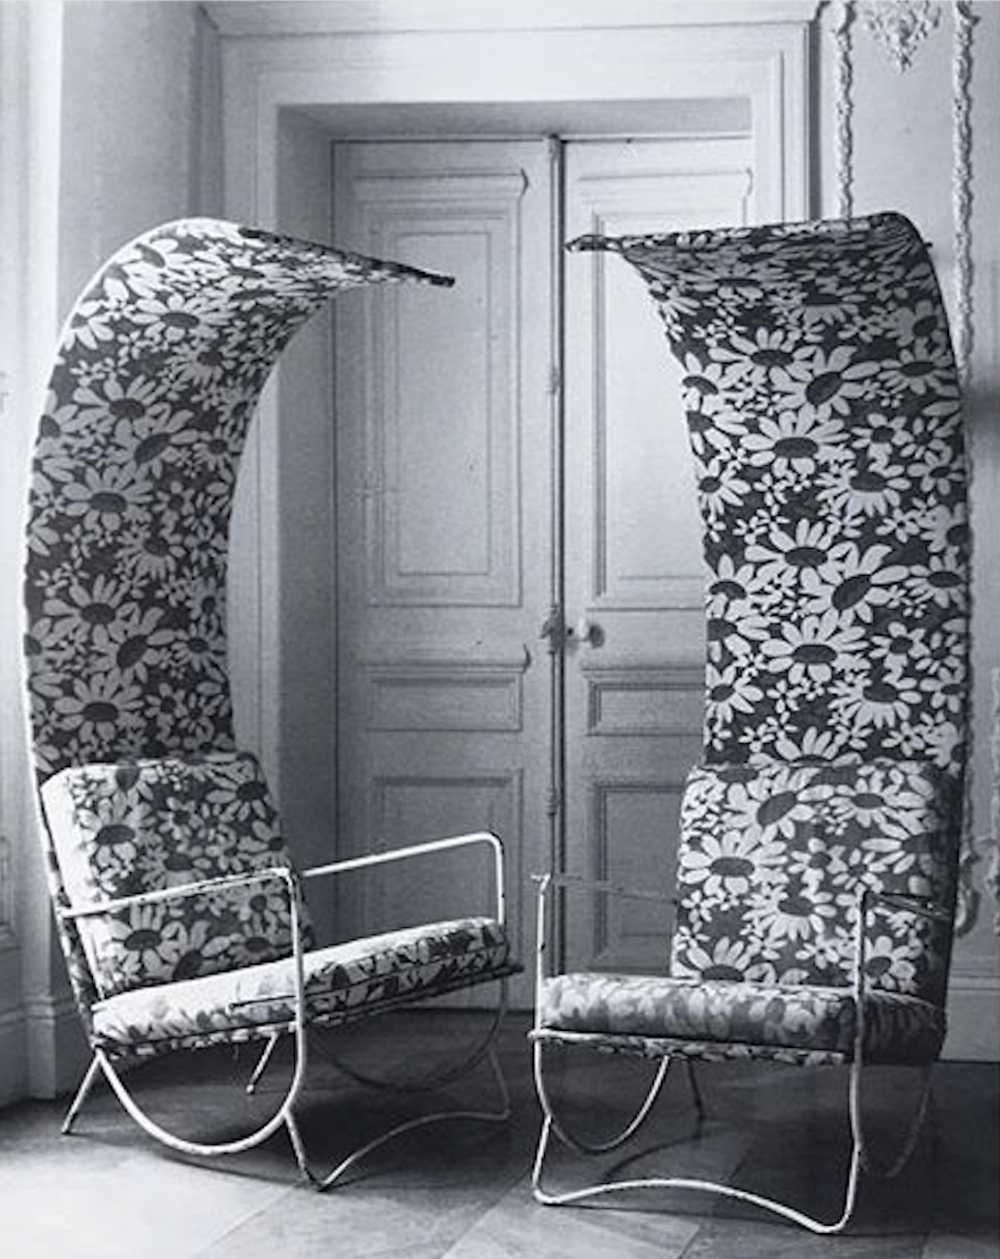 Jean roye  re  chairs  1959